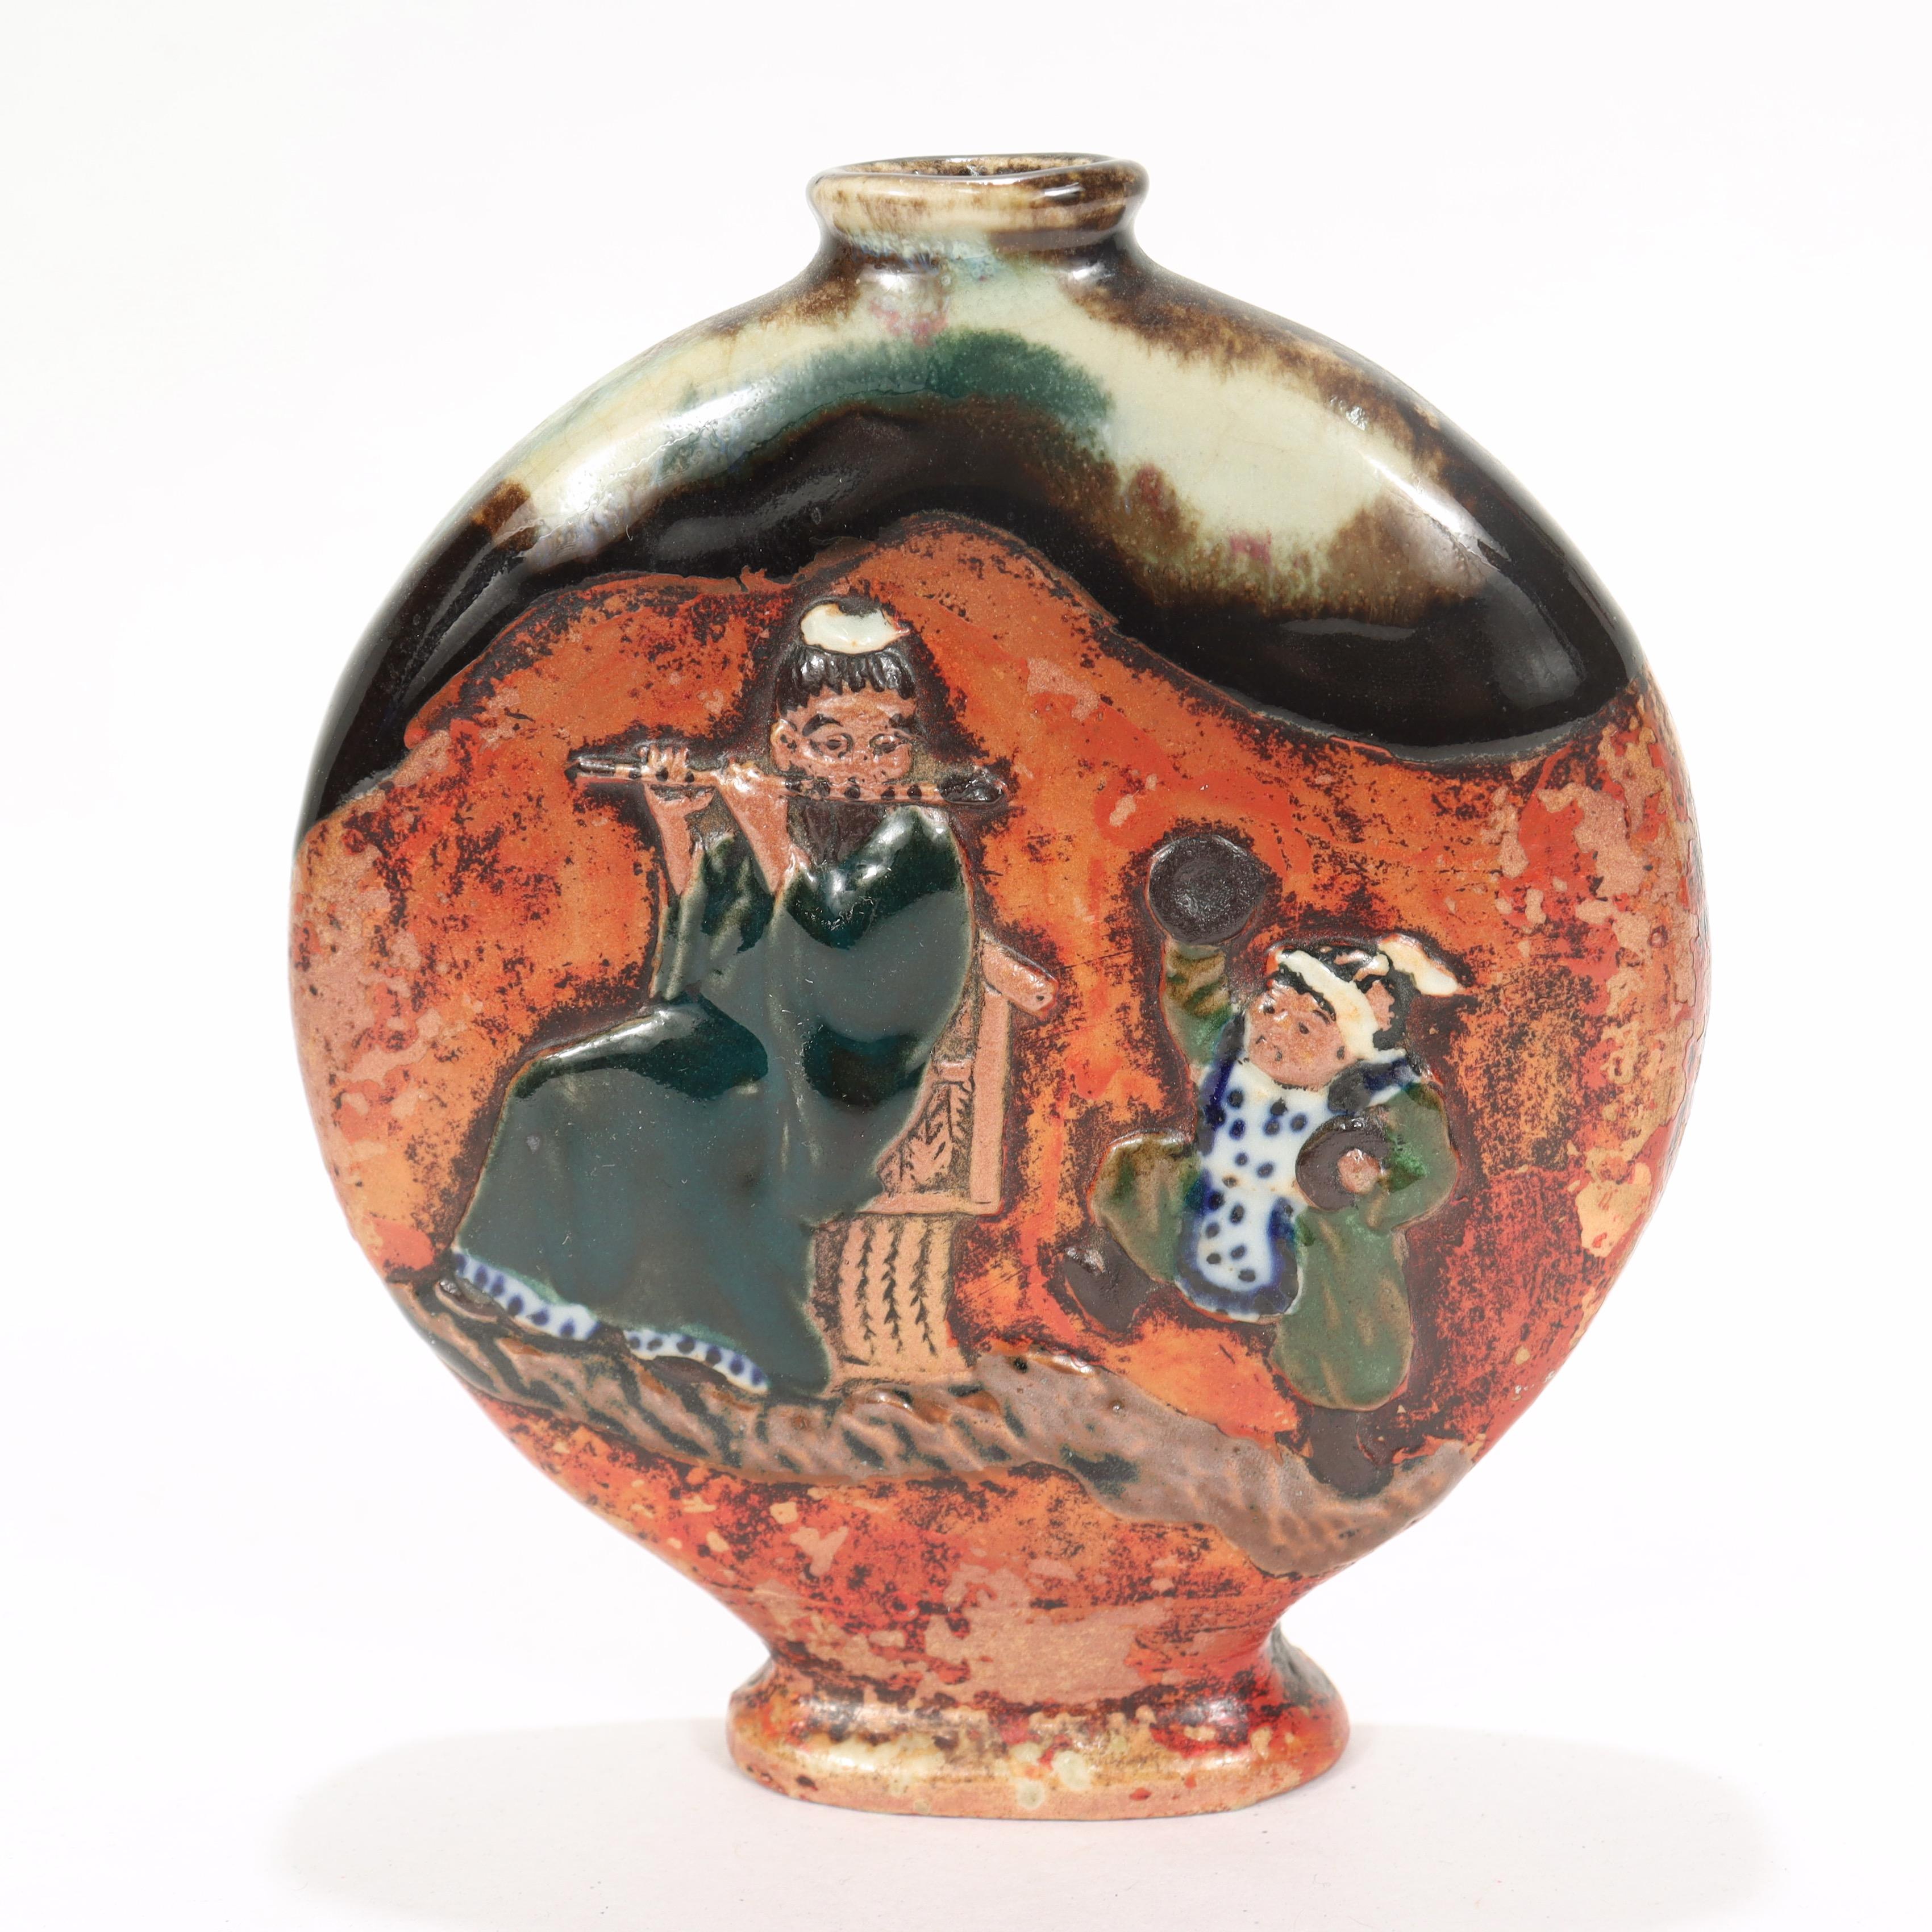 A fine antique Japanese Sumidagawa pottery moon flask vase.

Decorated to both sides. 

One side has a man playing a shinobue flute and a child dancing with a cymbal in each hand, while the other side depicts a lone sailboat in the ocean with